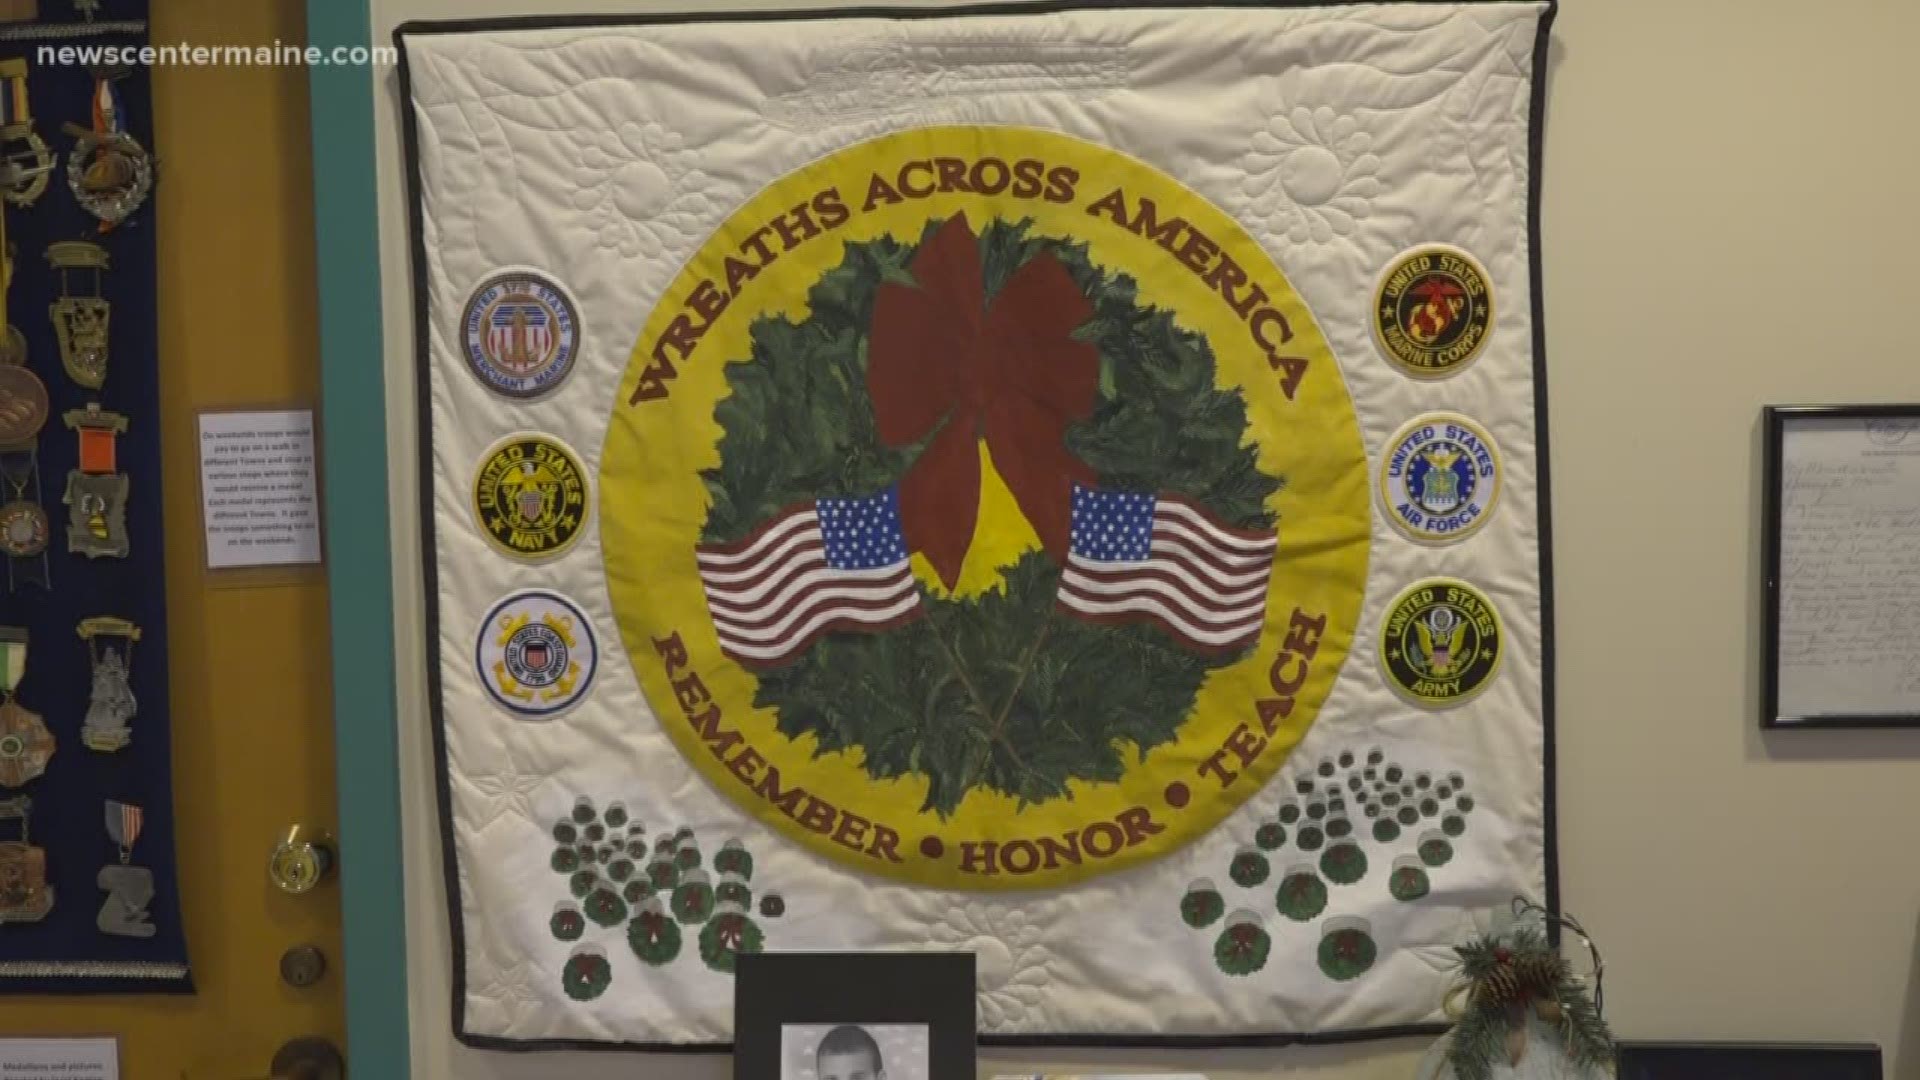 They call it "Wreaths Across America" --  and for the first time, Worcester's wreaths will reach across the ocean too.